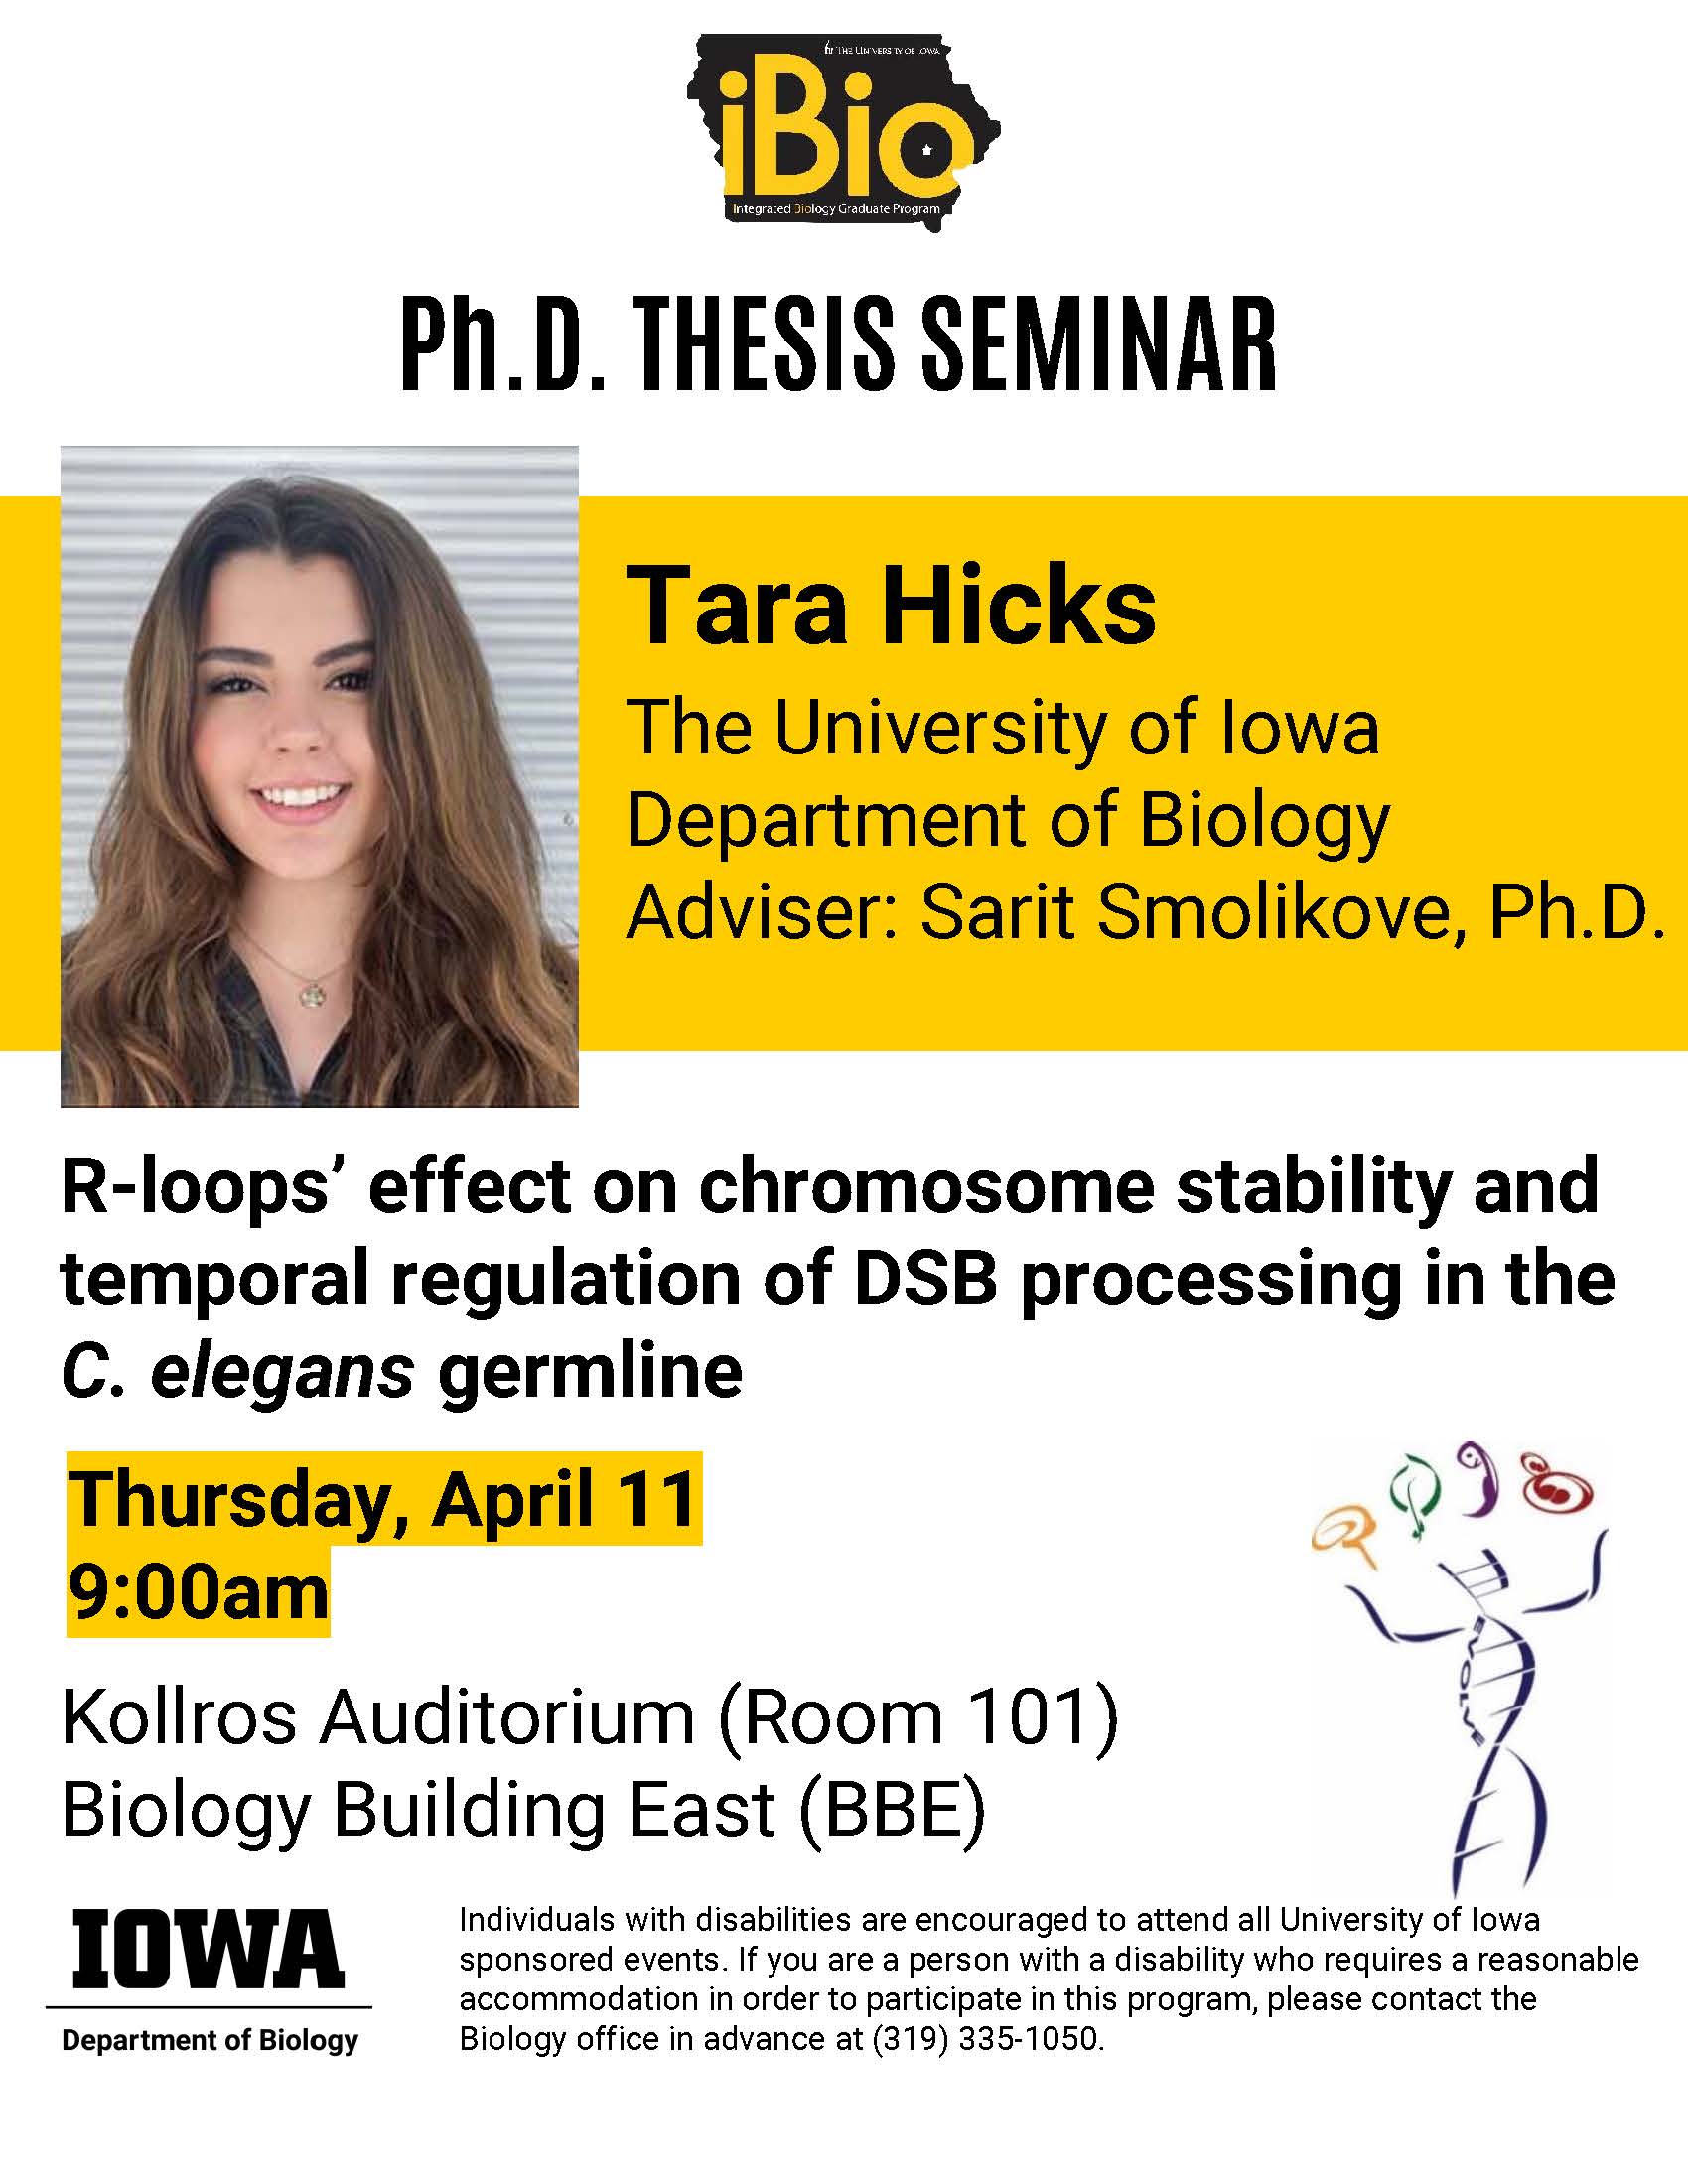 Thesis Seminar: R-loops' effect on chromosome stability and temporal regulation of DSB processing in the C. elegans germline promotional image